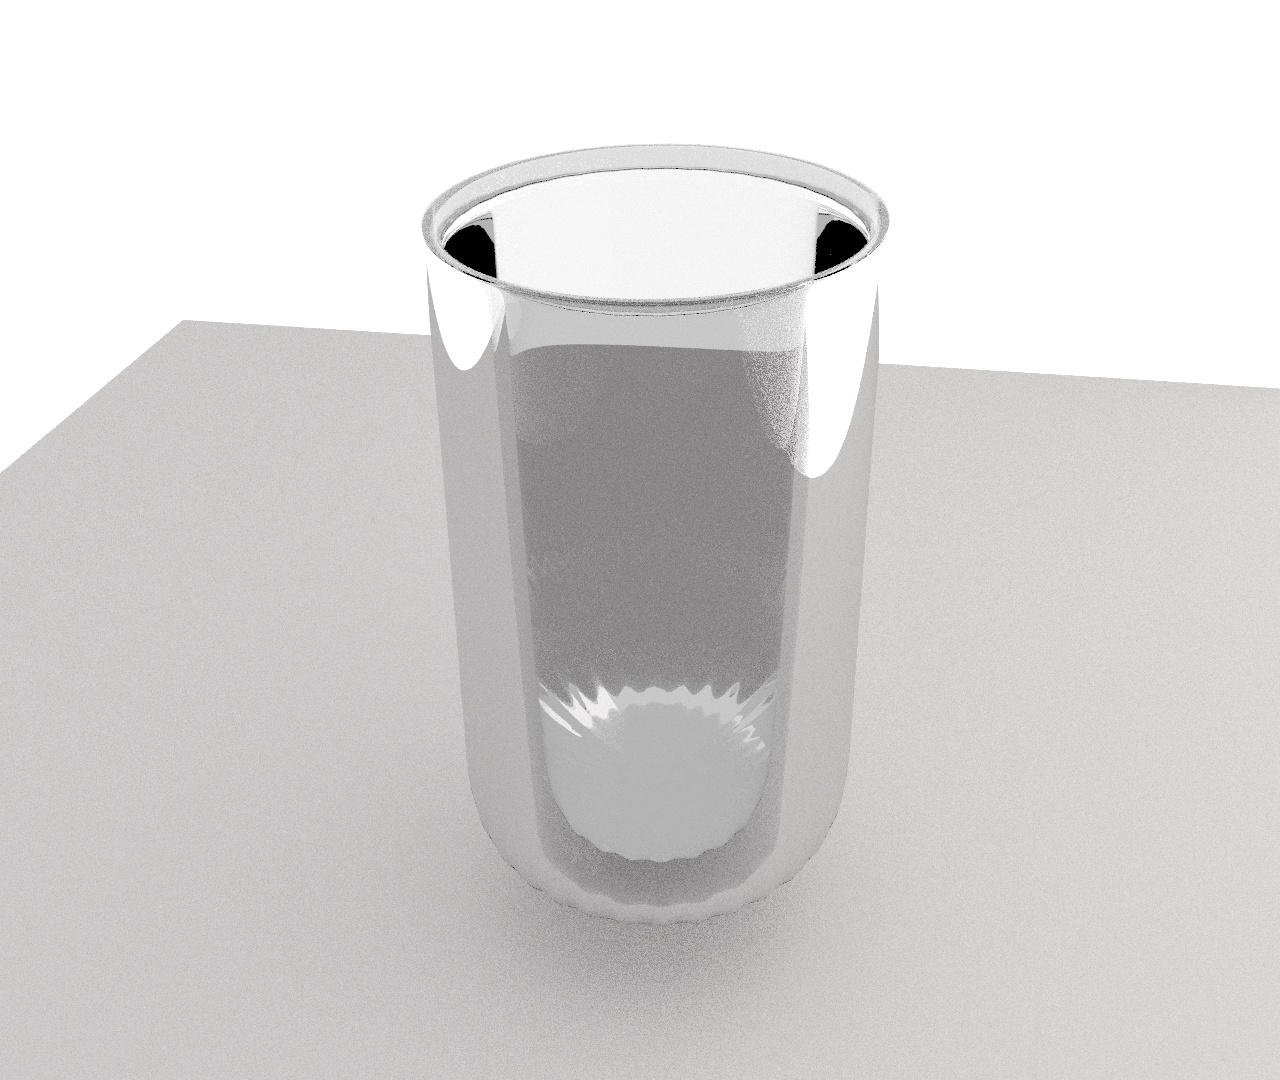 why does my glass have opaque shadows? : r/blender